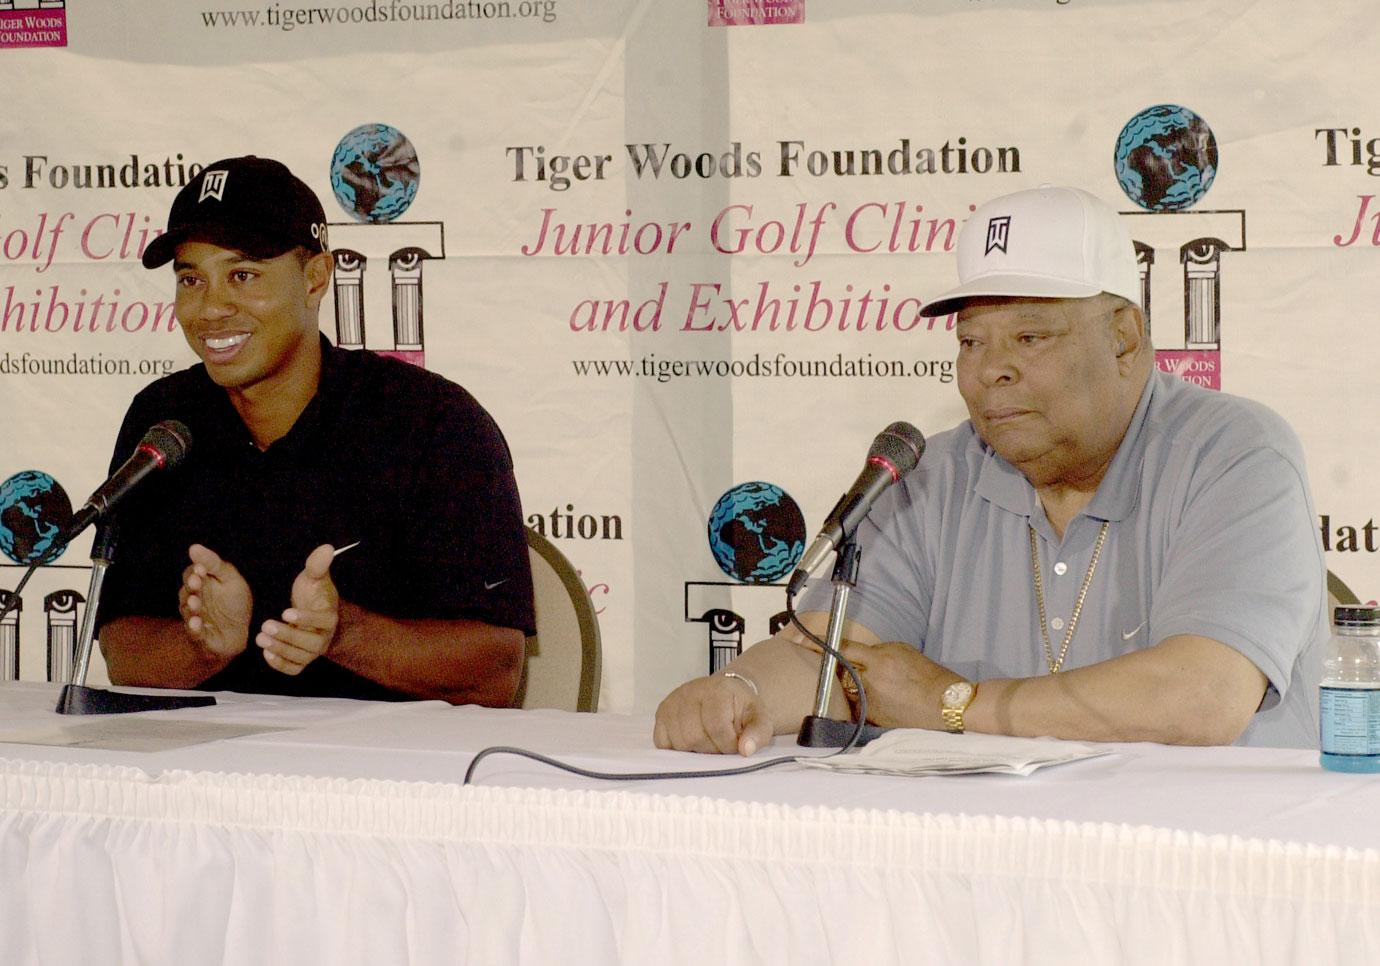 Porn, Cheating and Sex Toys! Tiger Woods Dads Womanizing Ways Exposed In Tell-All